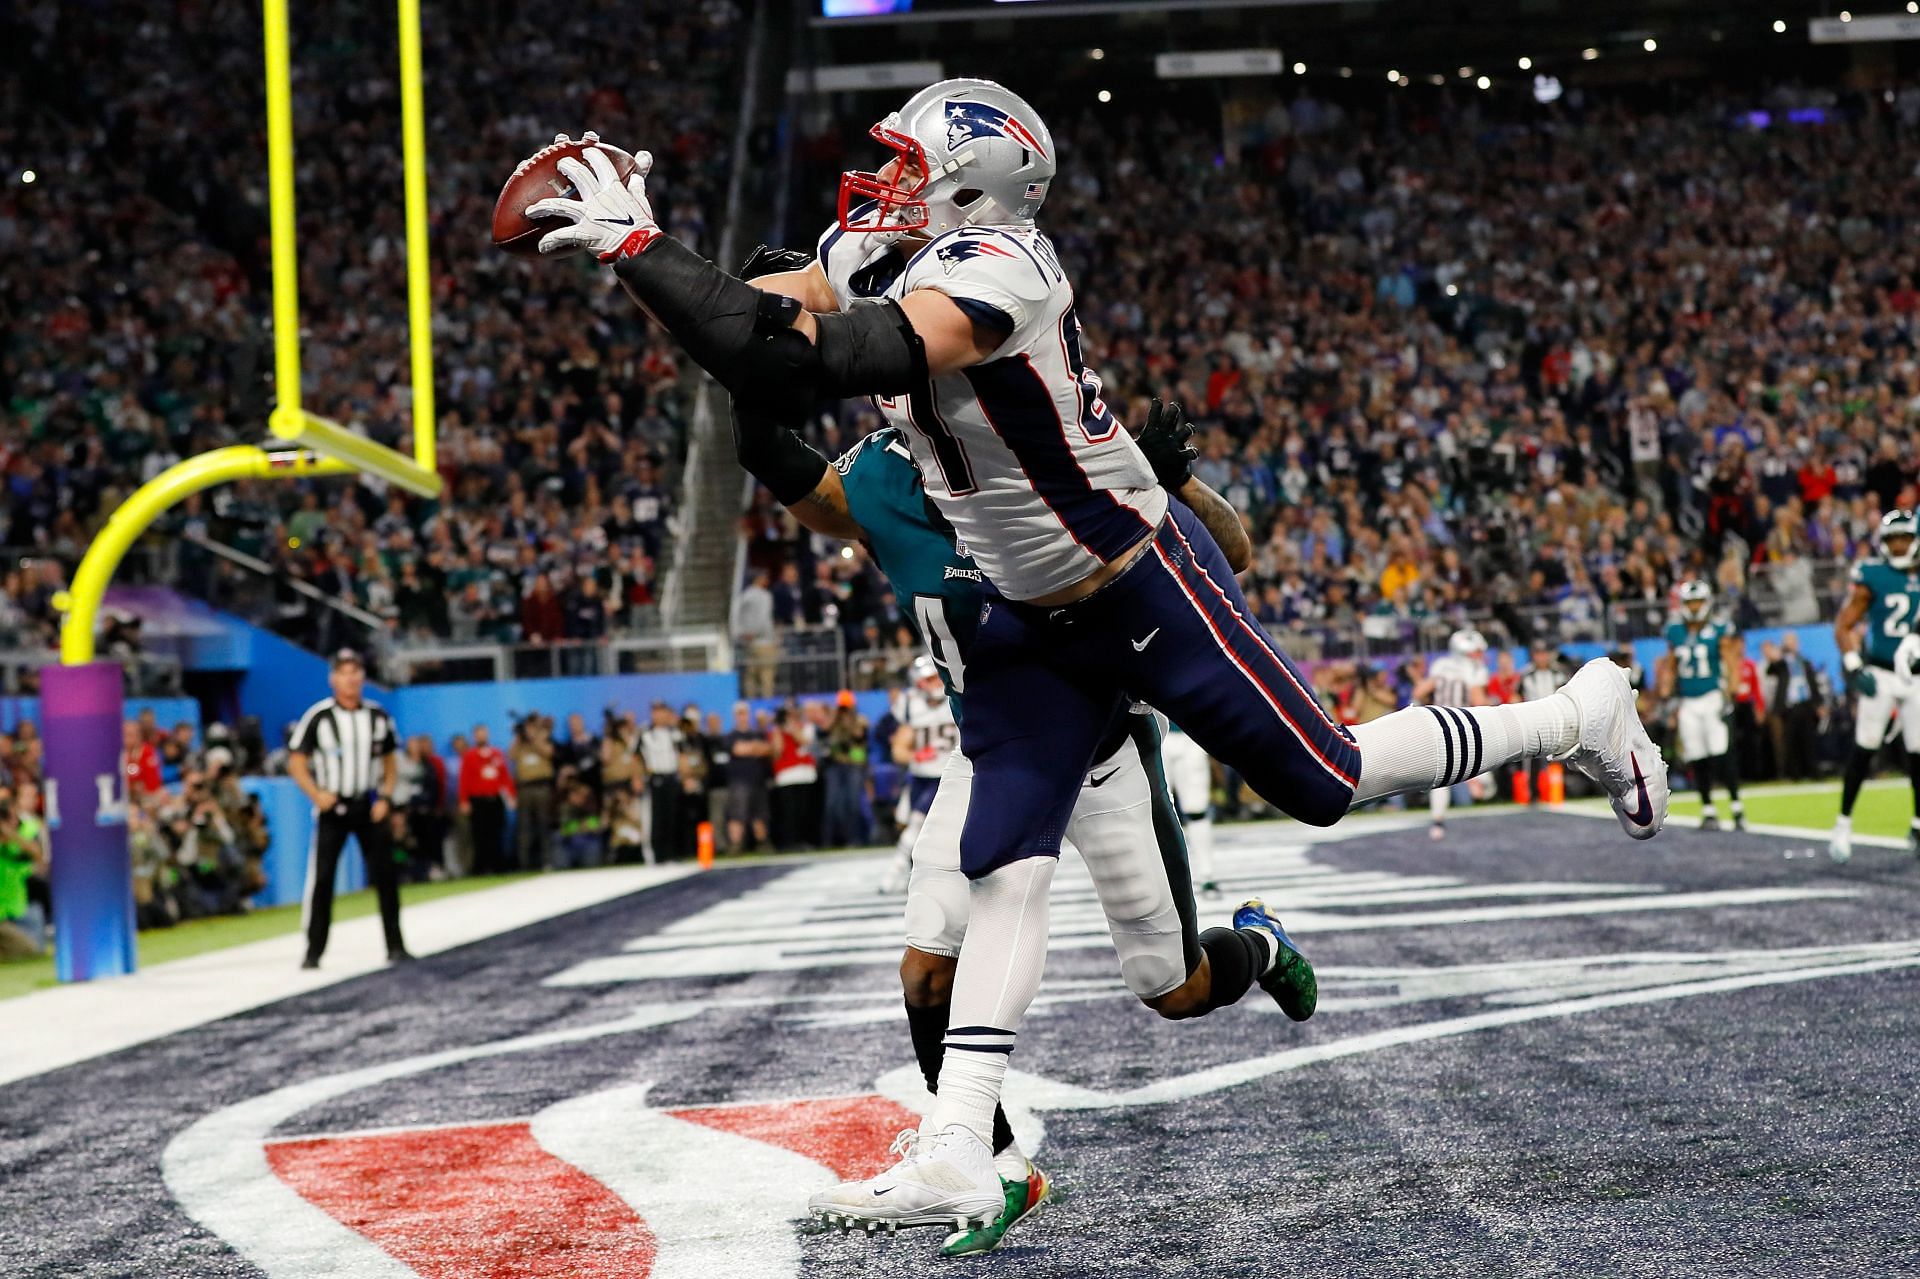 Gronkowski catches a touchdown pass in Super Bowl LII